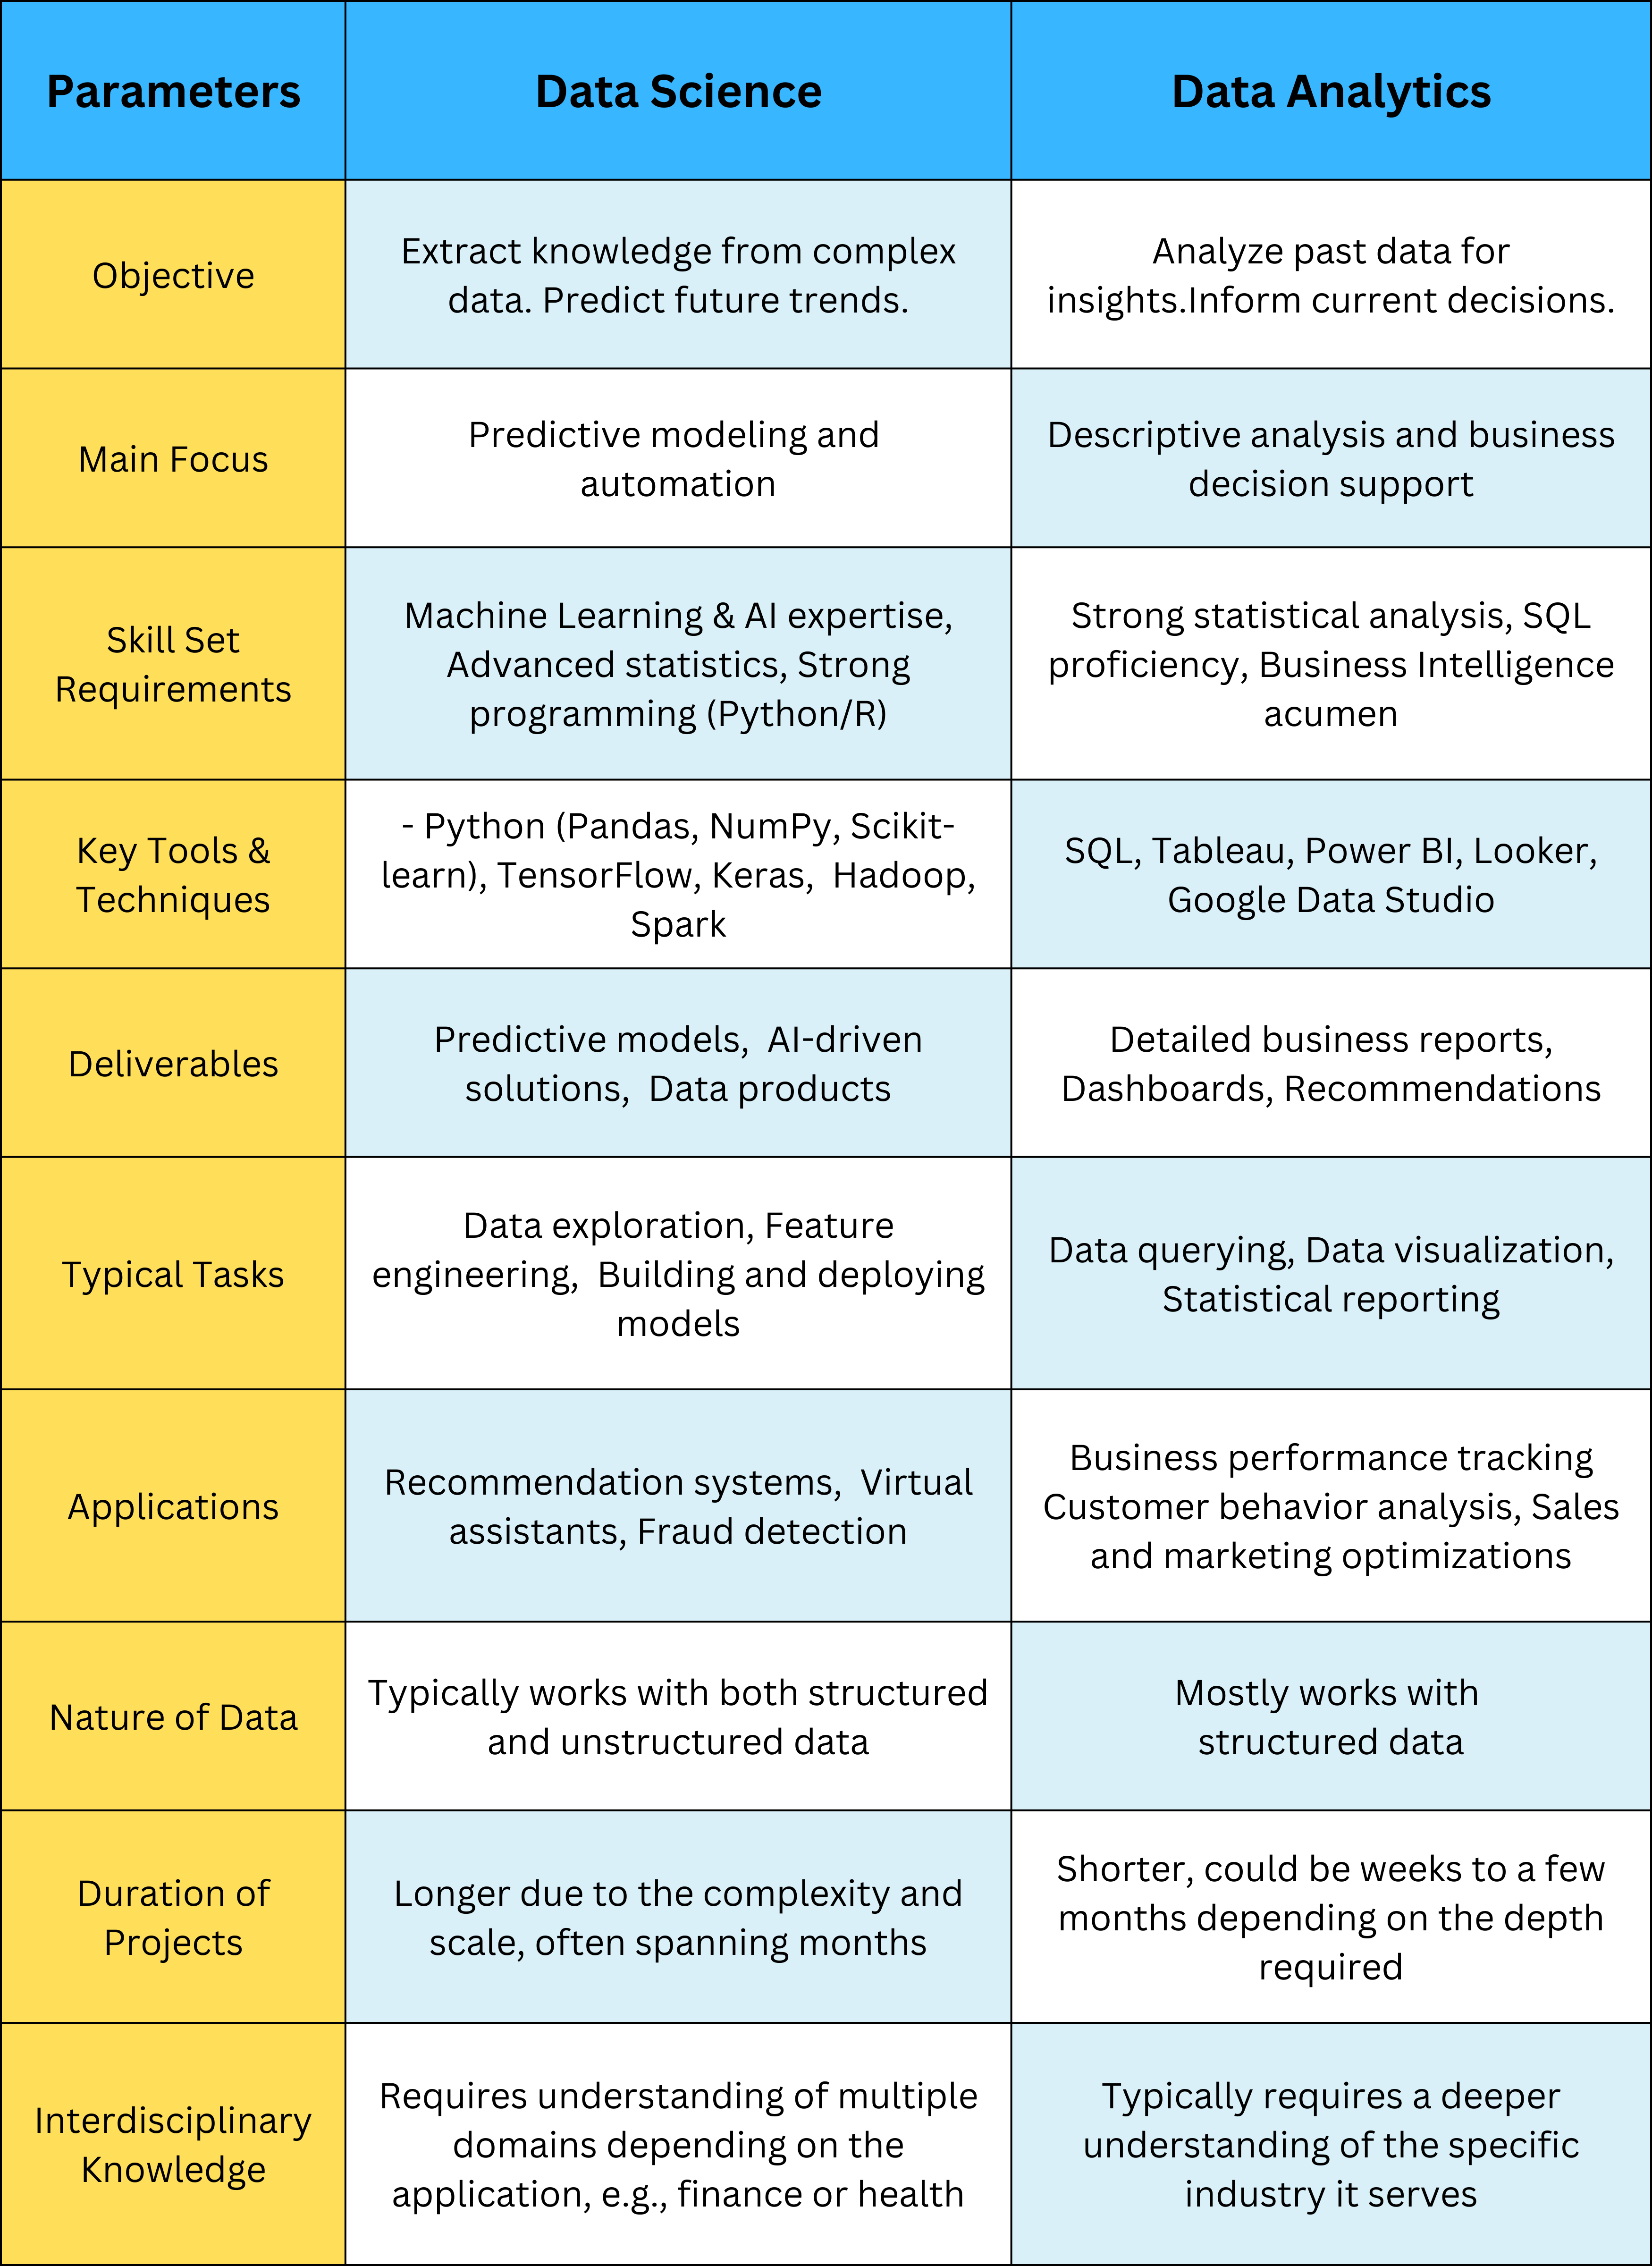 comparision of data science and data analytics